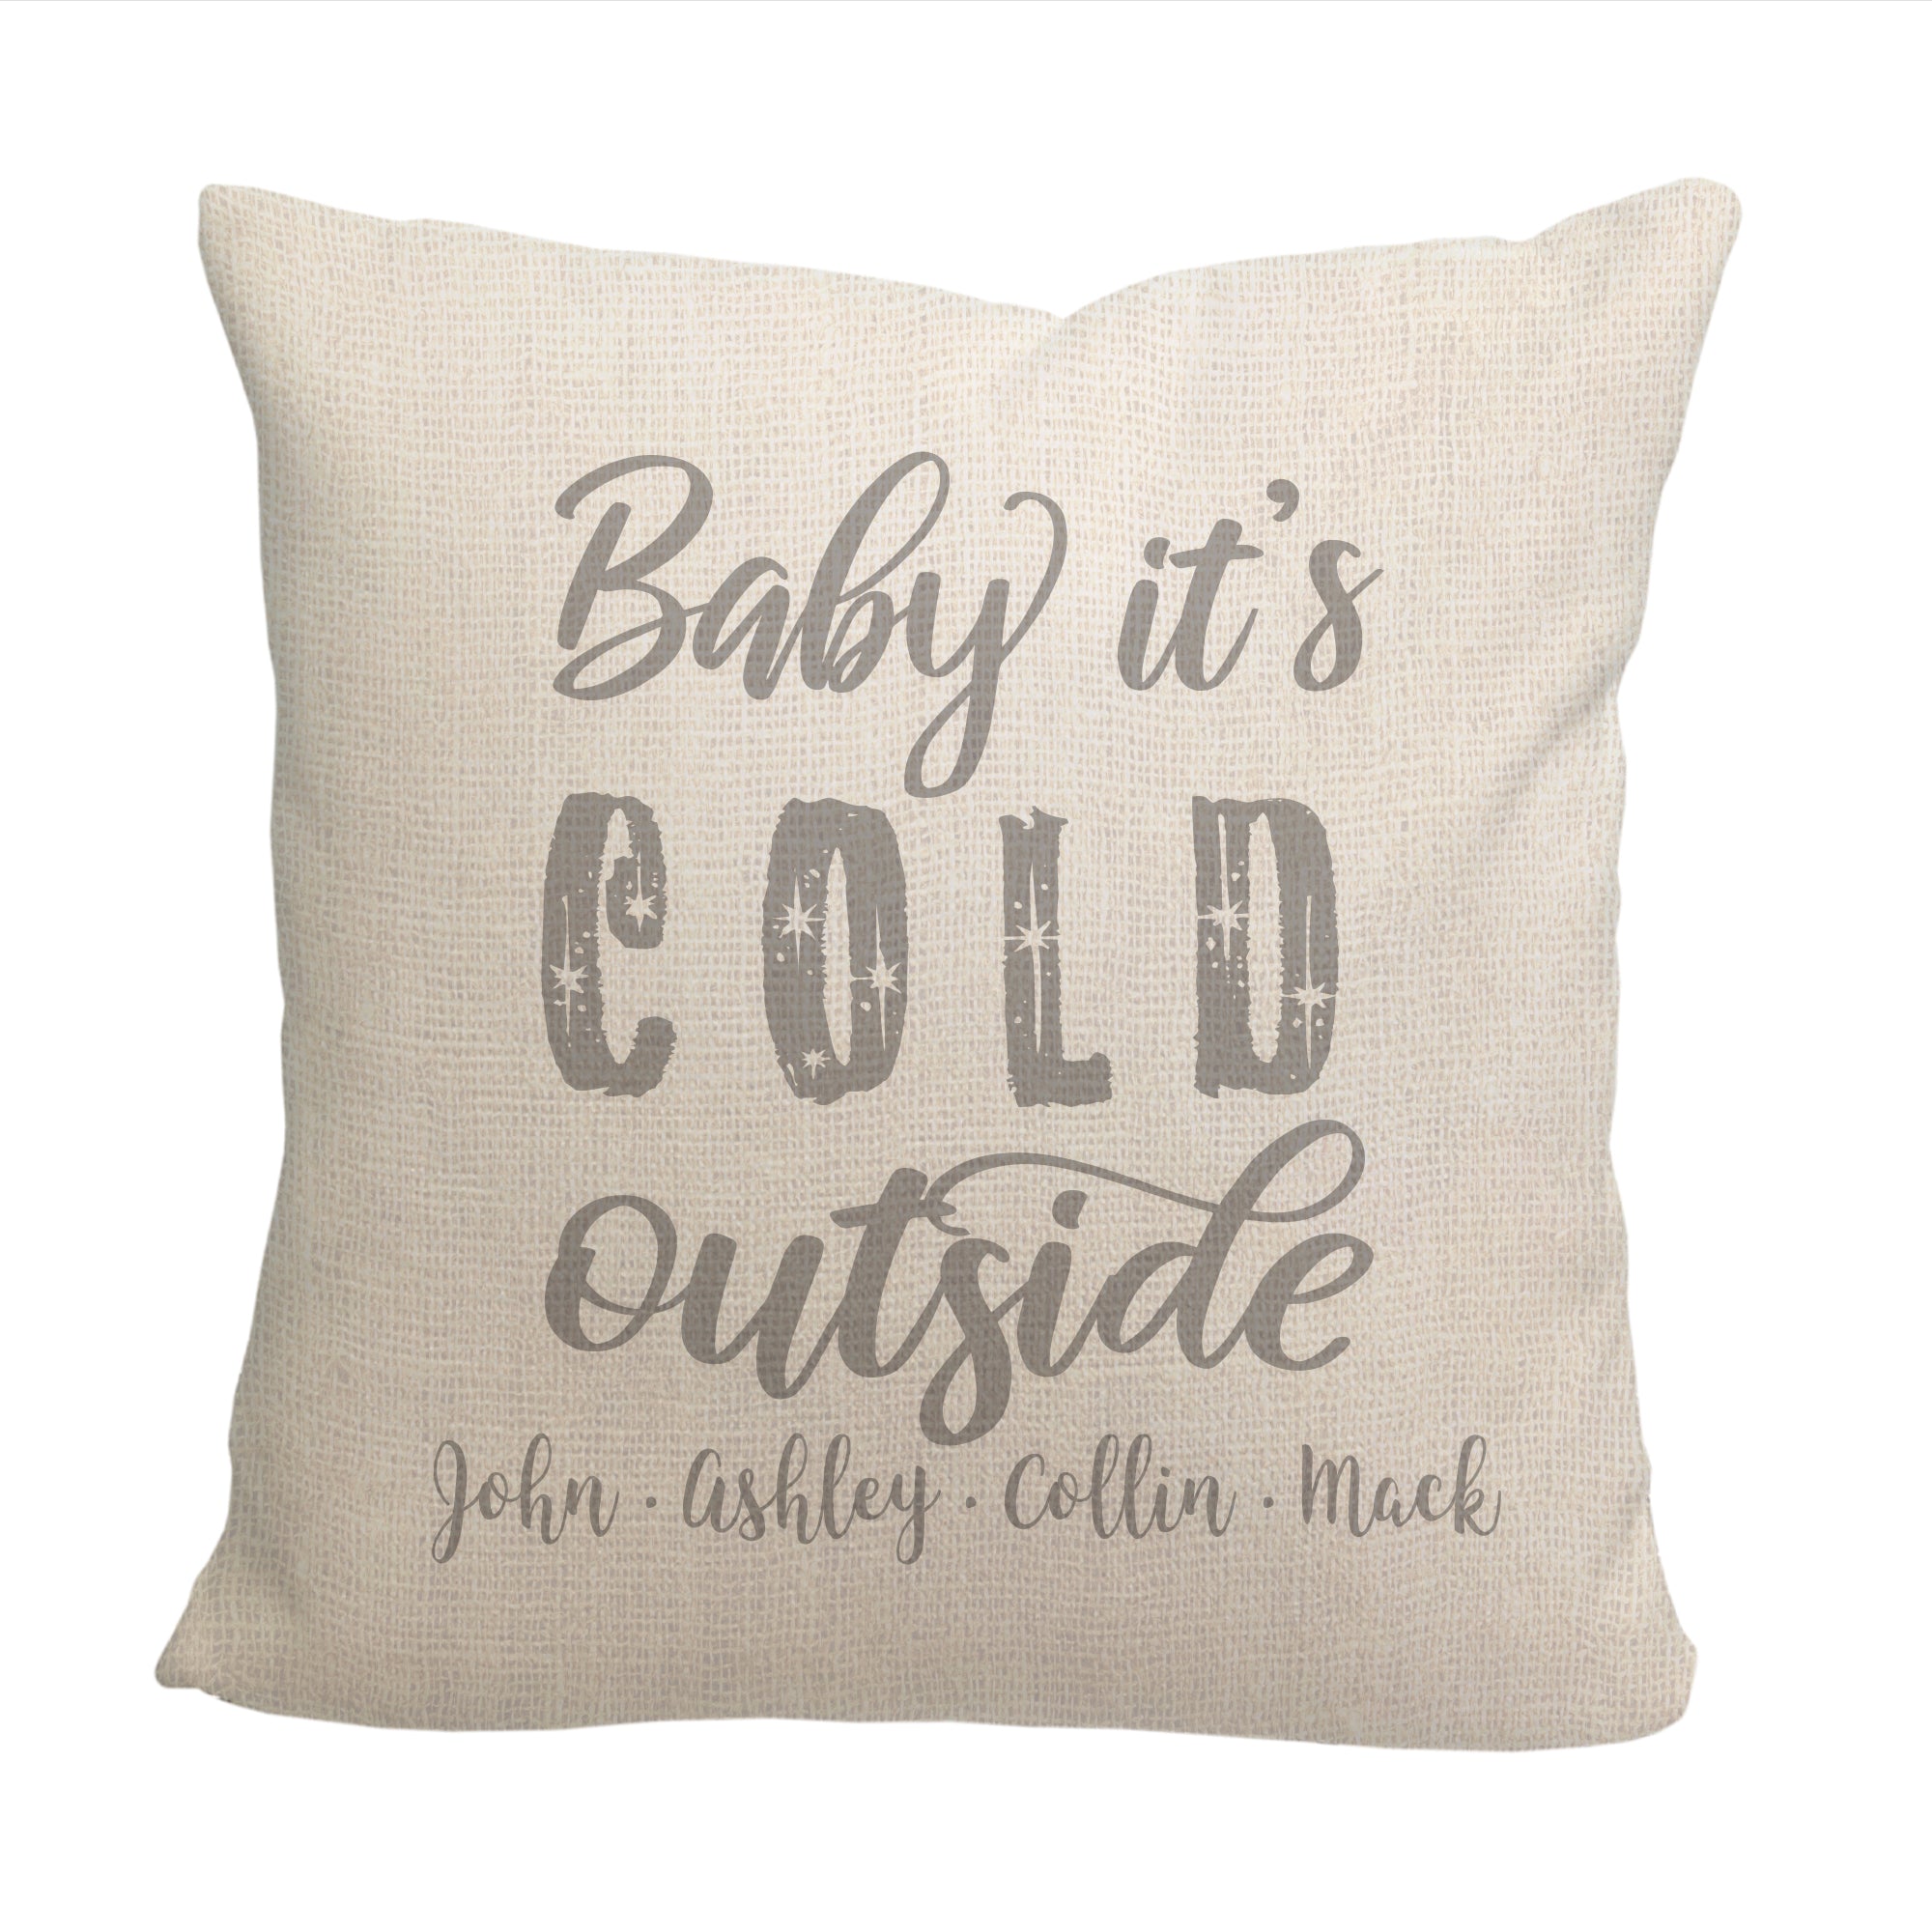 Baby it's Cold Outside Throw Pillow - - Cover Only OR Cover with Insert